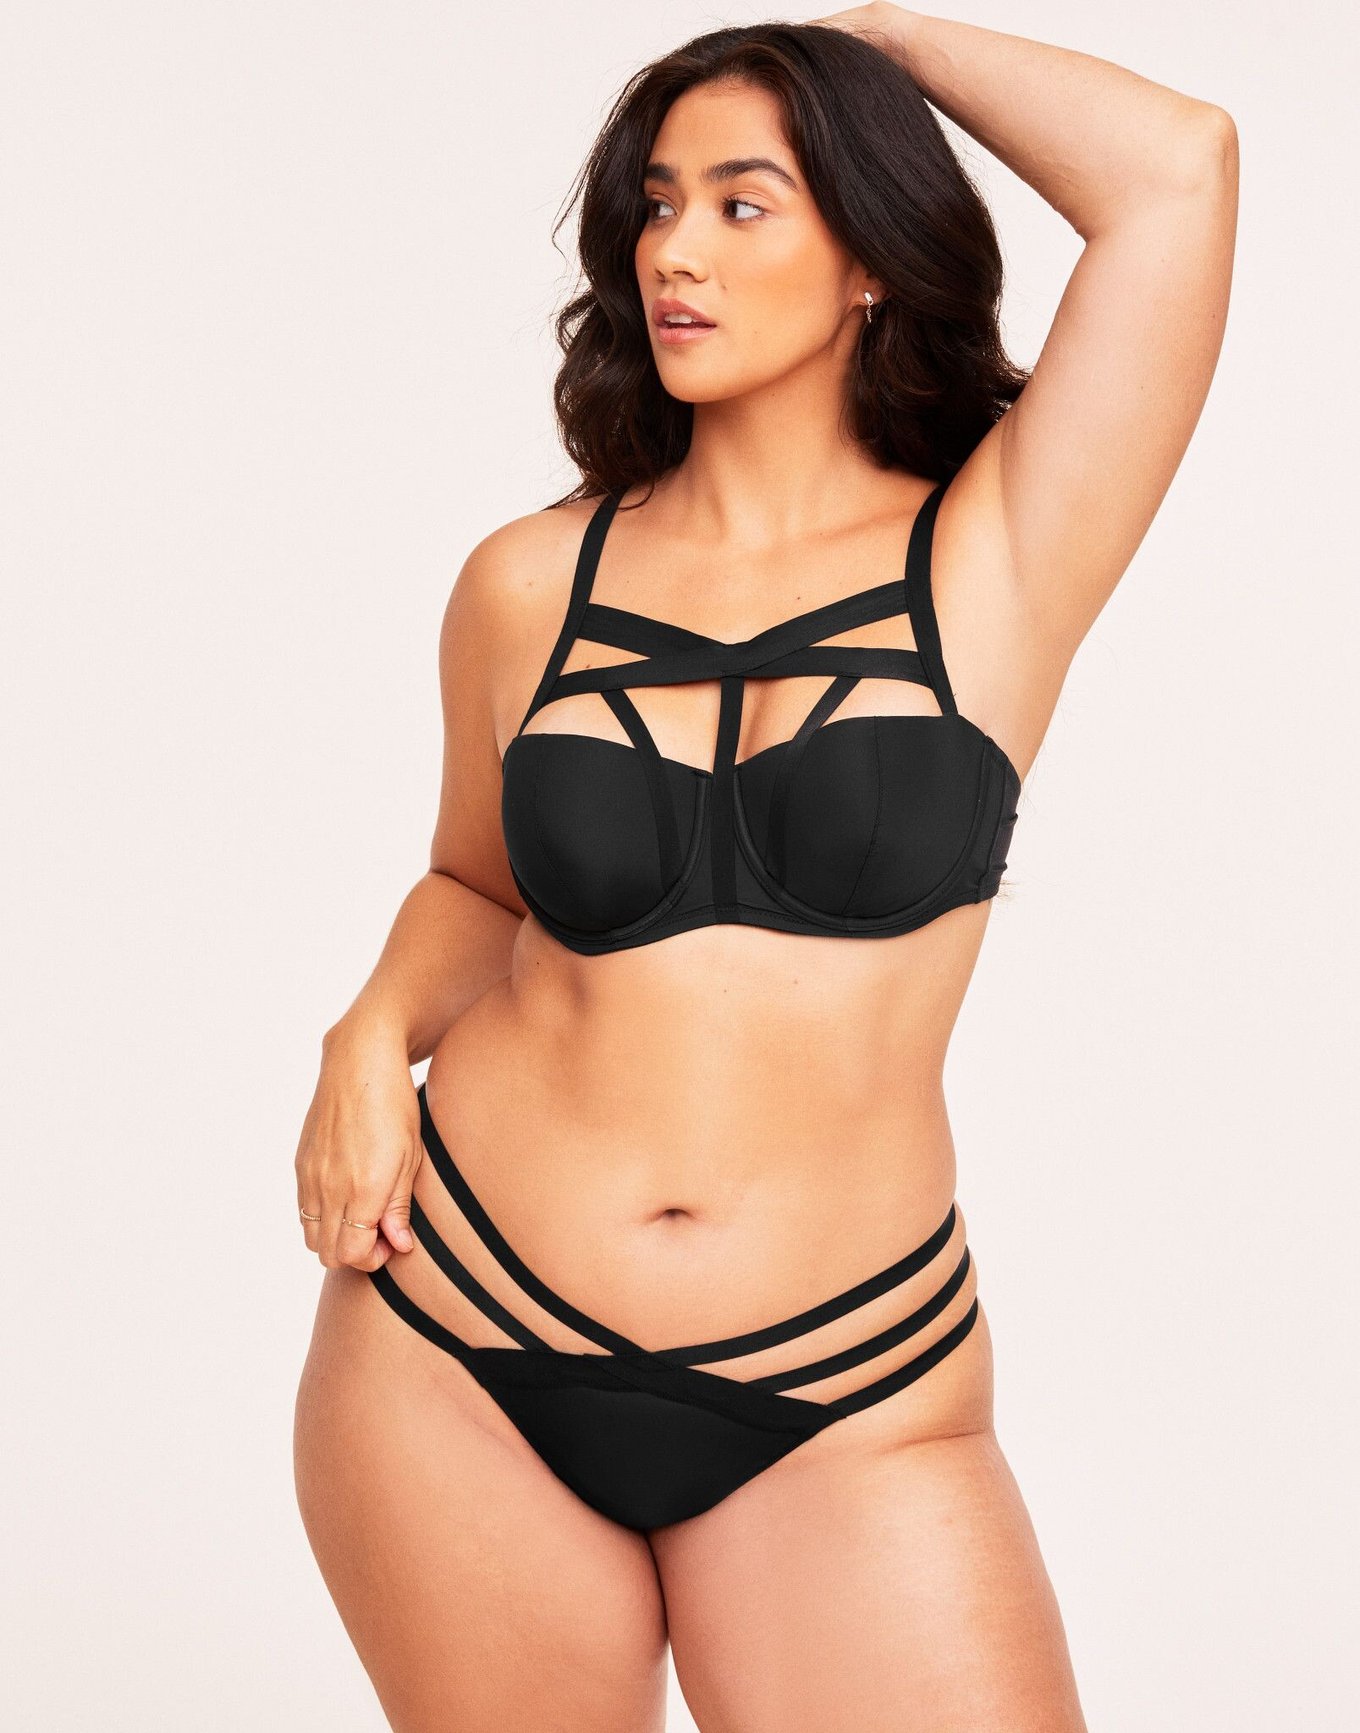 Adore Me, Intimates & Sleepwear, Adore Me Holley Contour Plus Red And  Black Bra Size 4dd